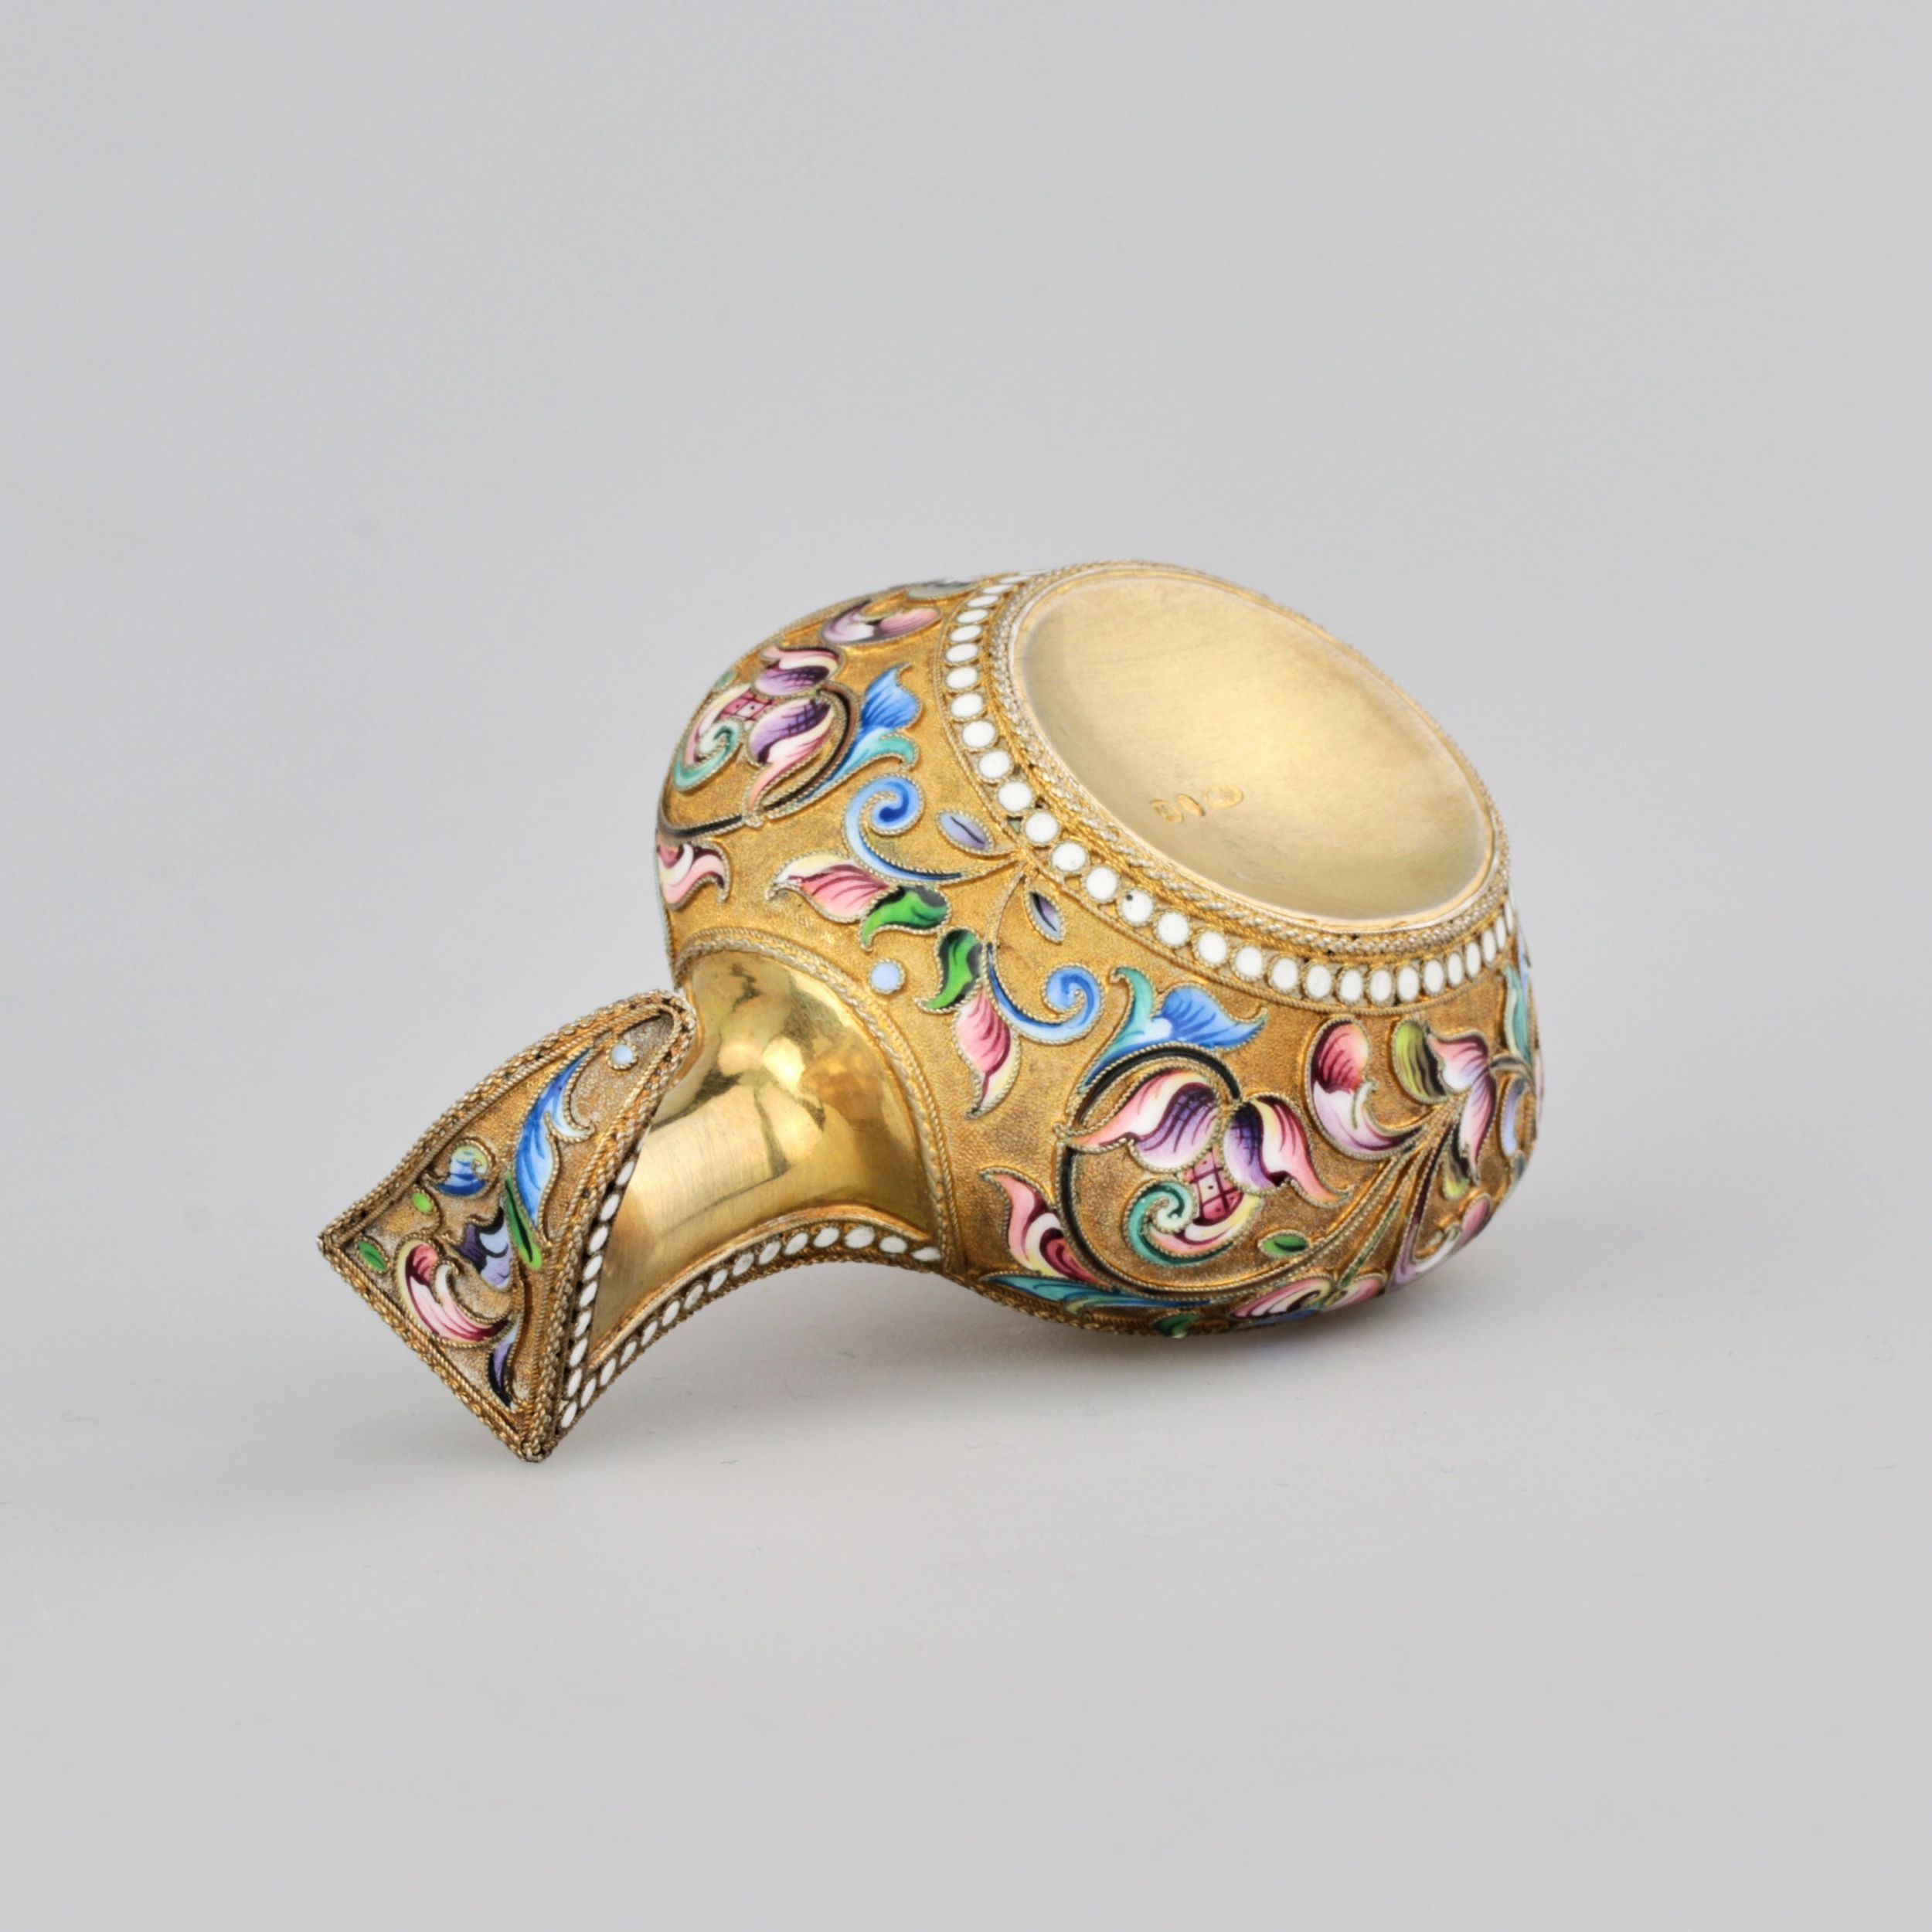 Decorative kovsh in Russian style with enamel. - Image 6 of 7